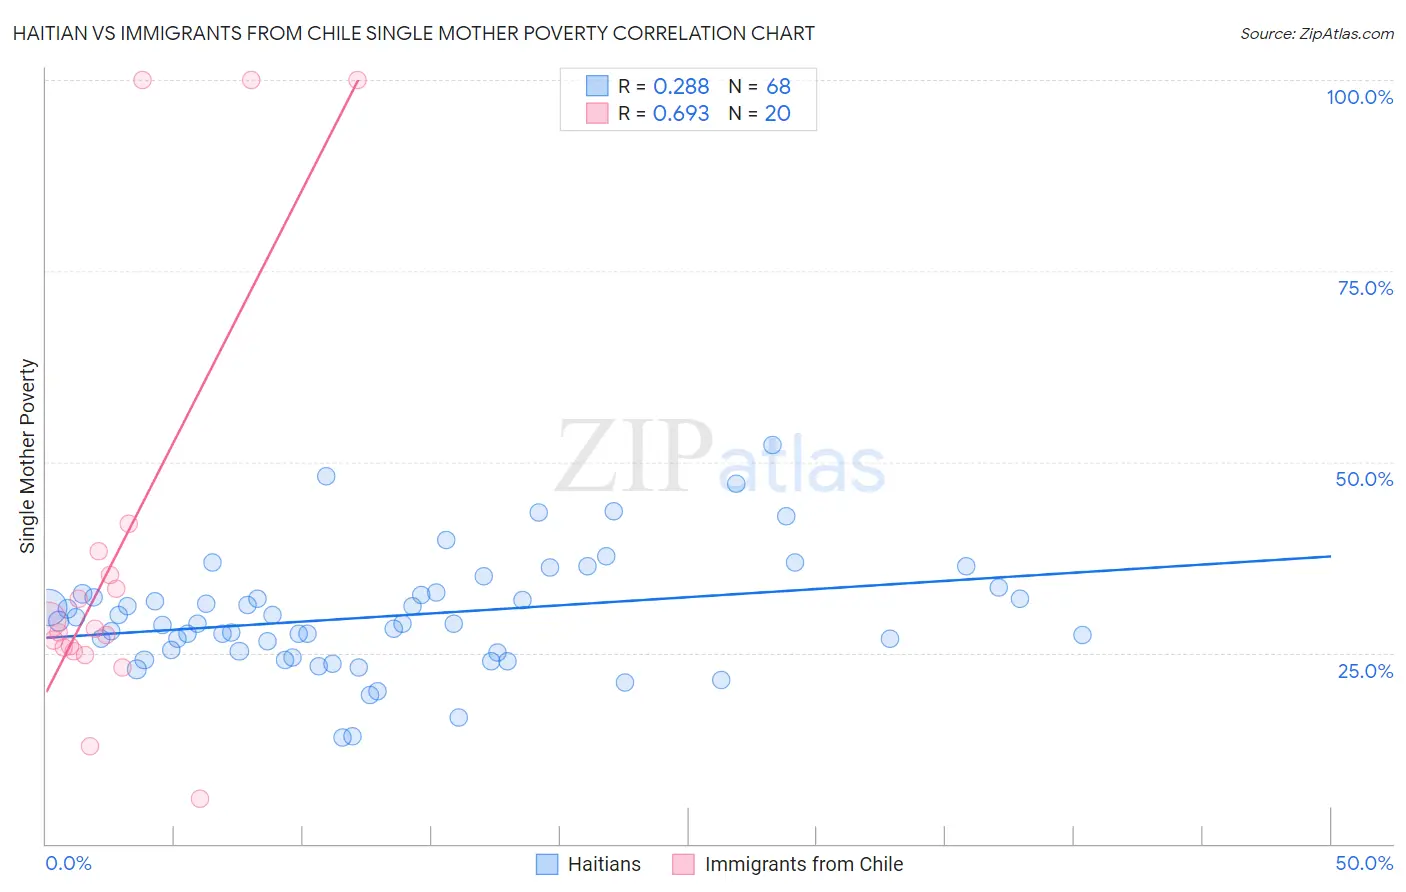 Haitian vs Immigrants from Chile Single Mother Poverty